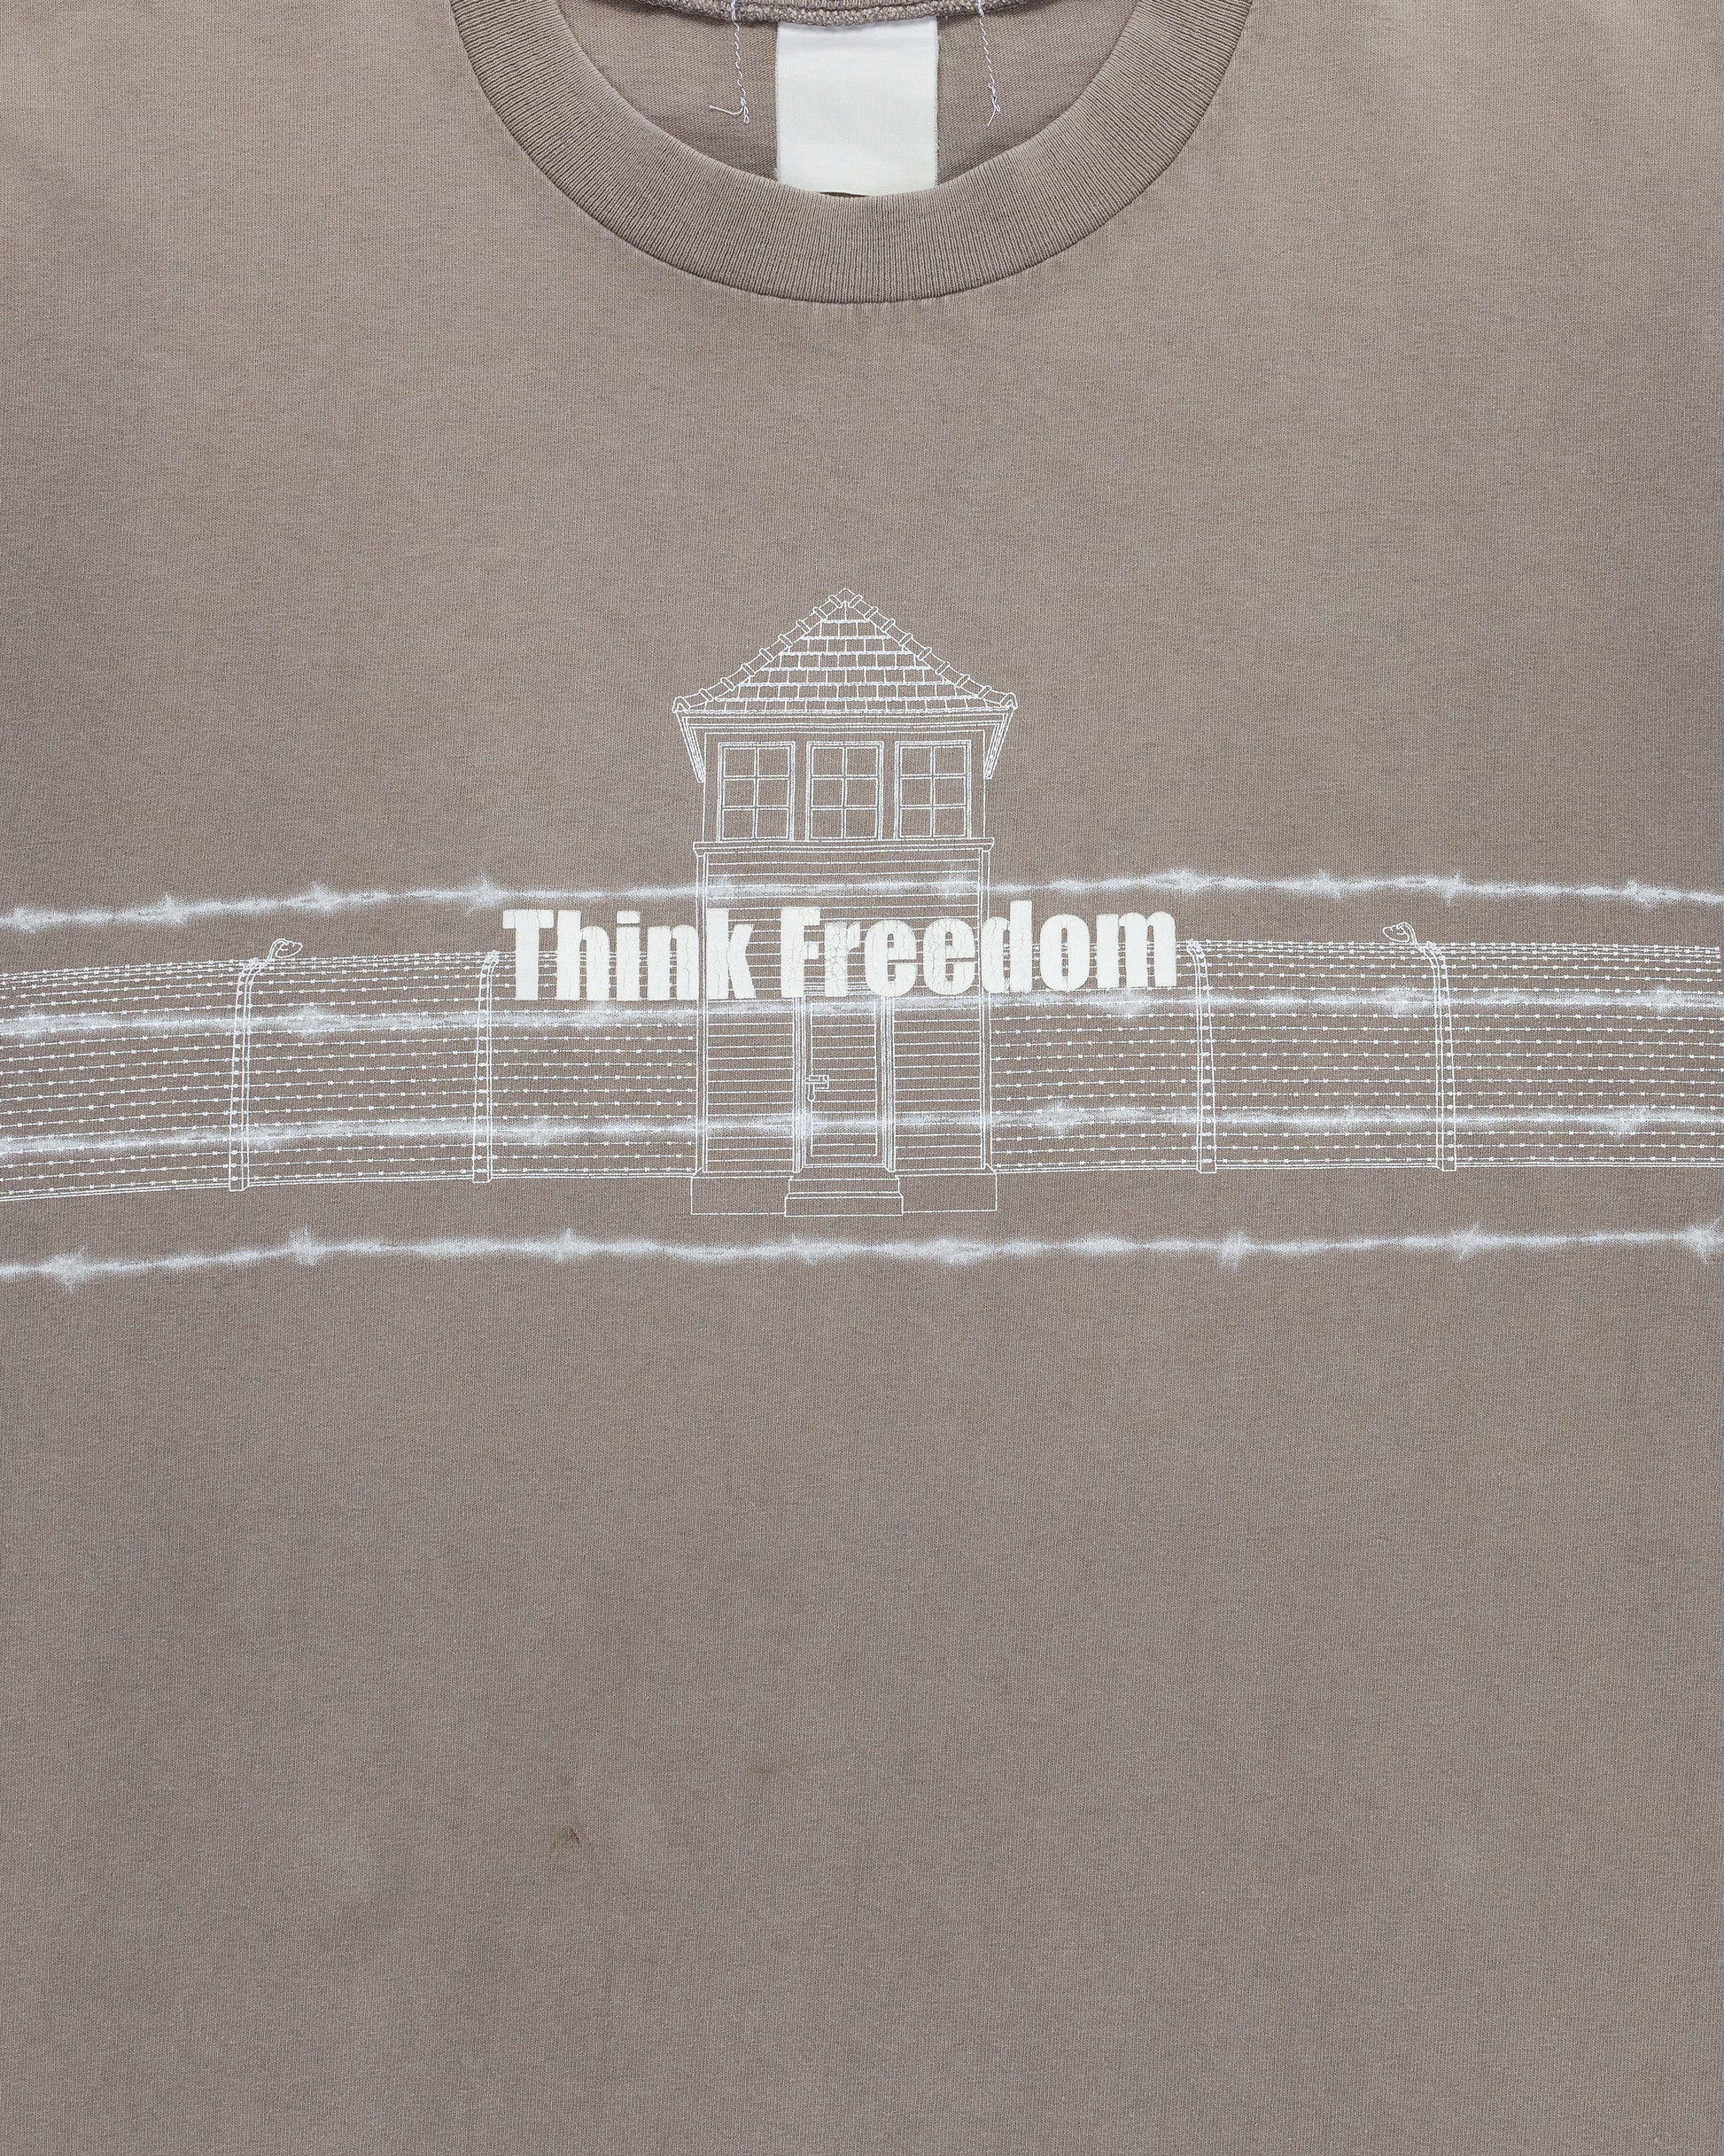 Freedom is a State of Mind T-shirt - Philosophy